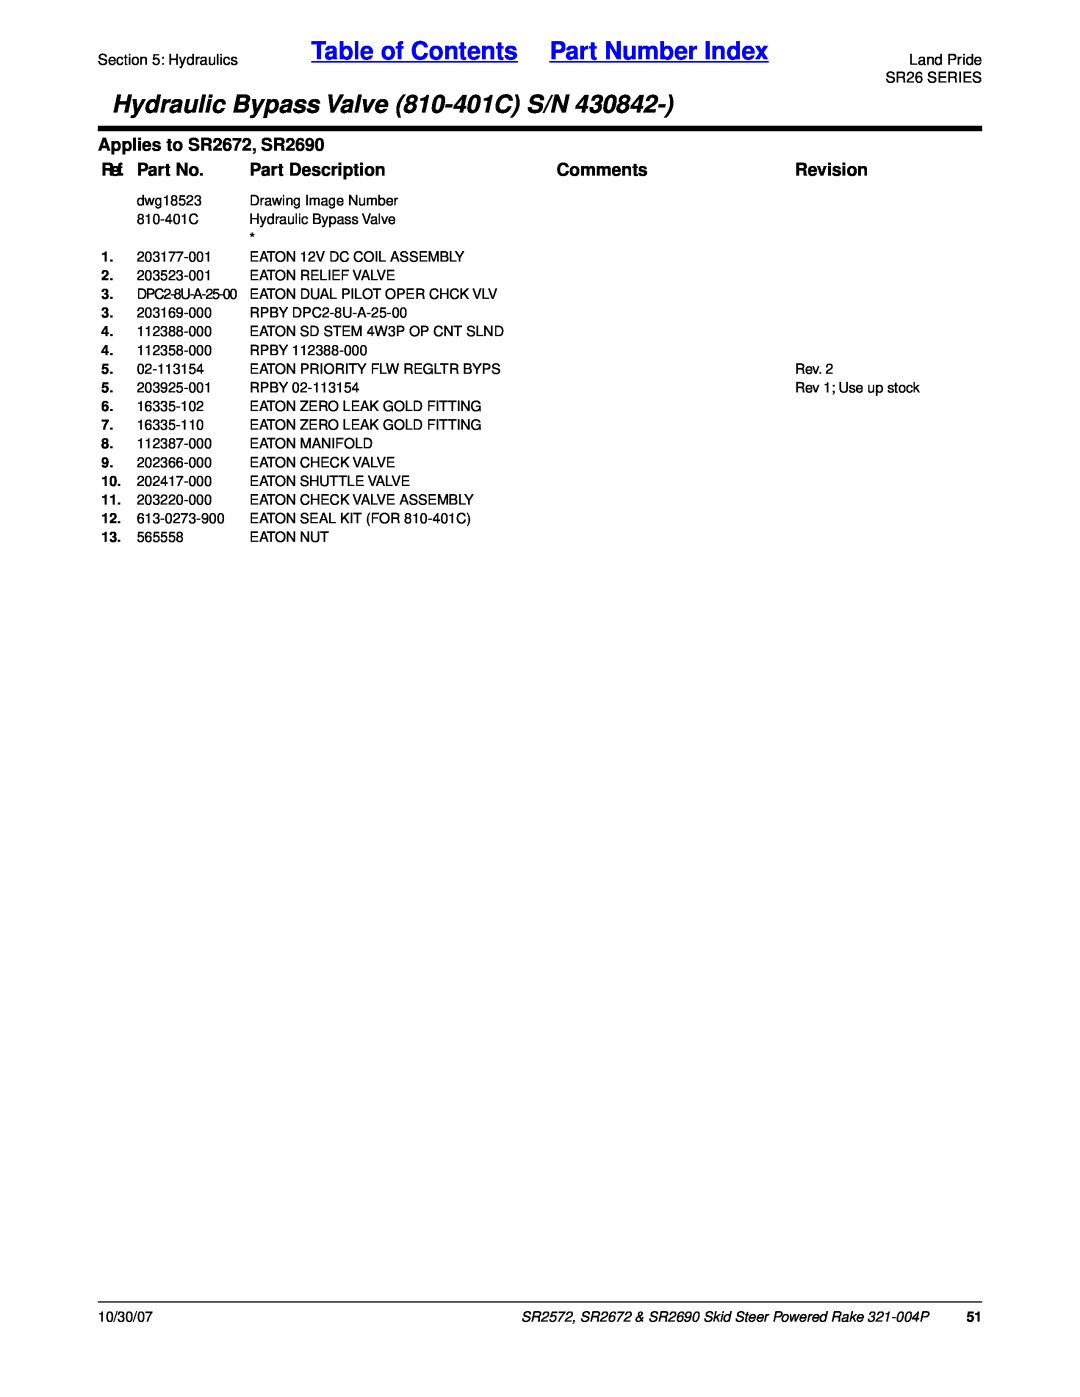 Land Pride Table of Contents Part Number Index, Hydraulic Bypass Valve 810-401CS/N, Applies to SR2672, SR2690, Comments 